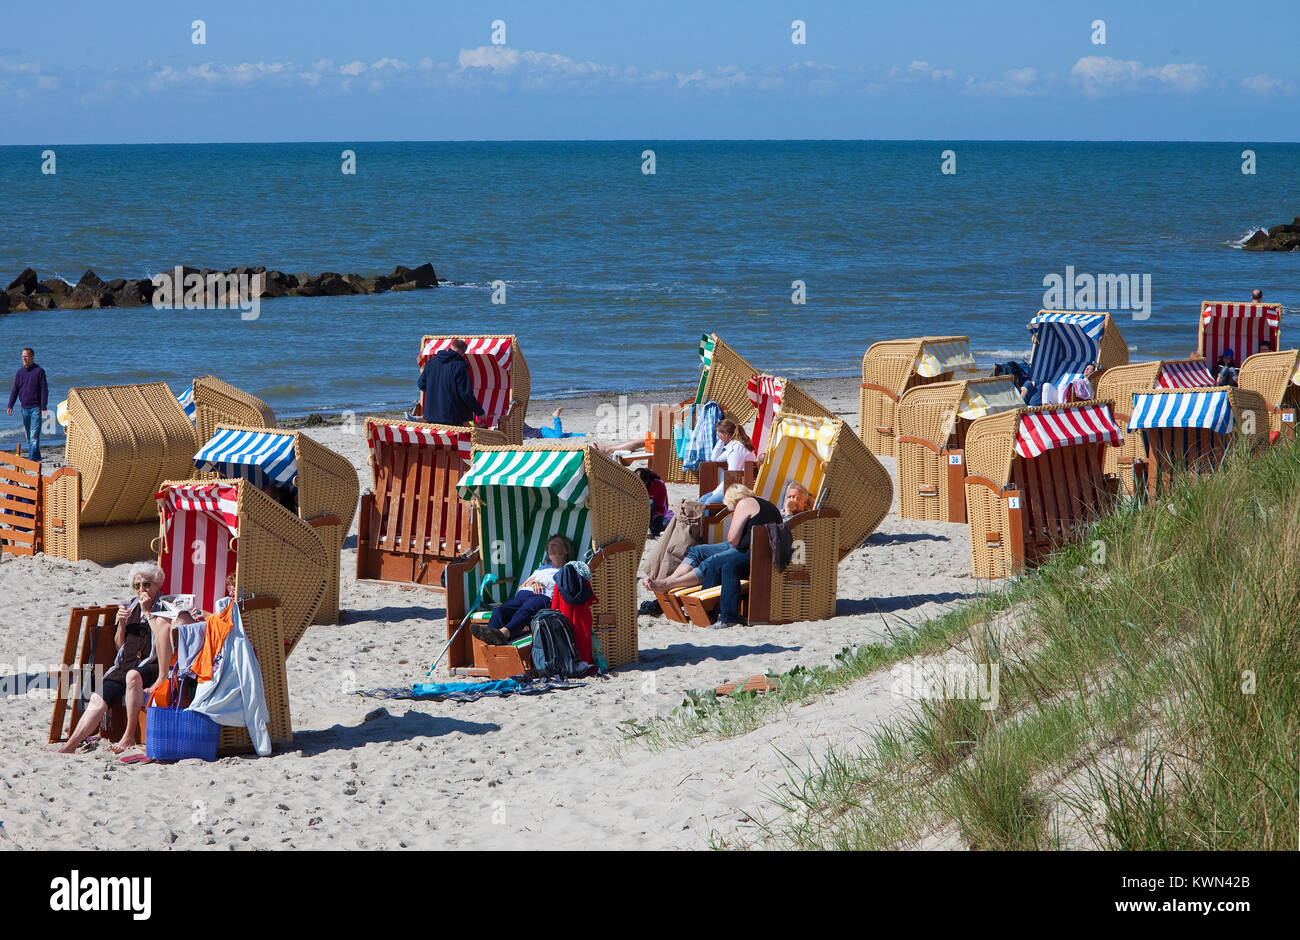 Tourists in beach chairs at the beach of Wustrow, Fishland, Mecklenburg-Western Pomerania, Baltic sea, Germany, Europe Stock Photo